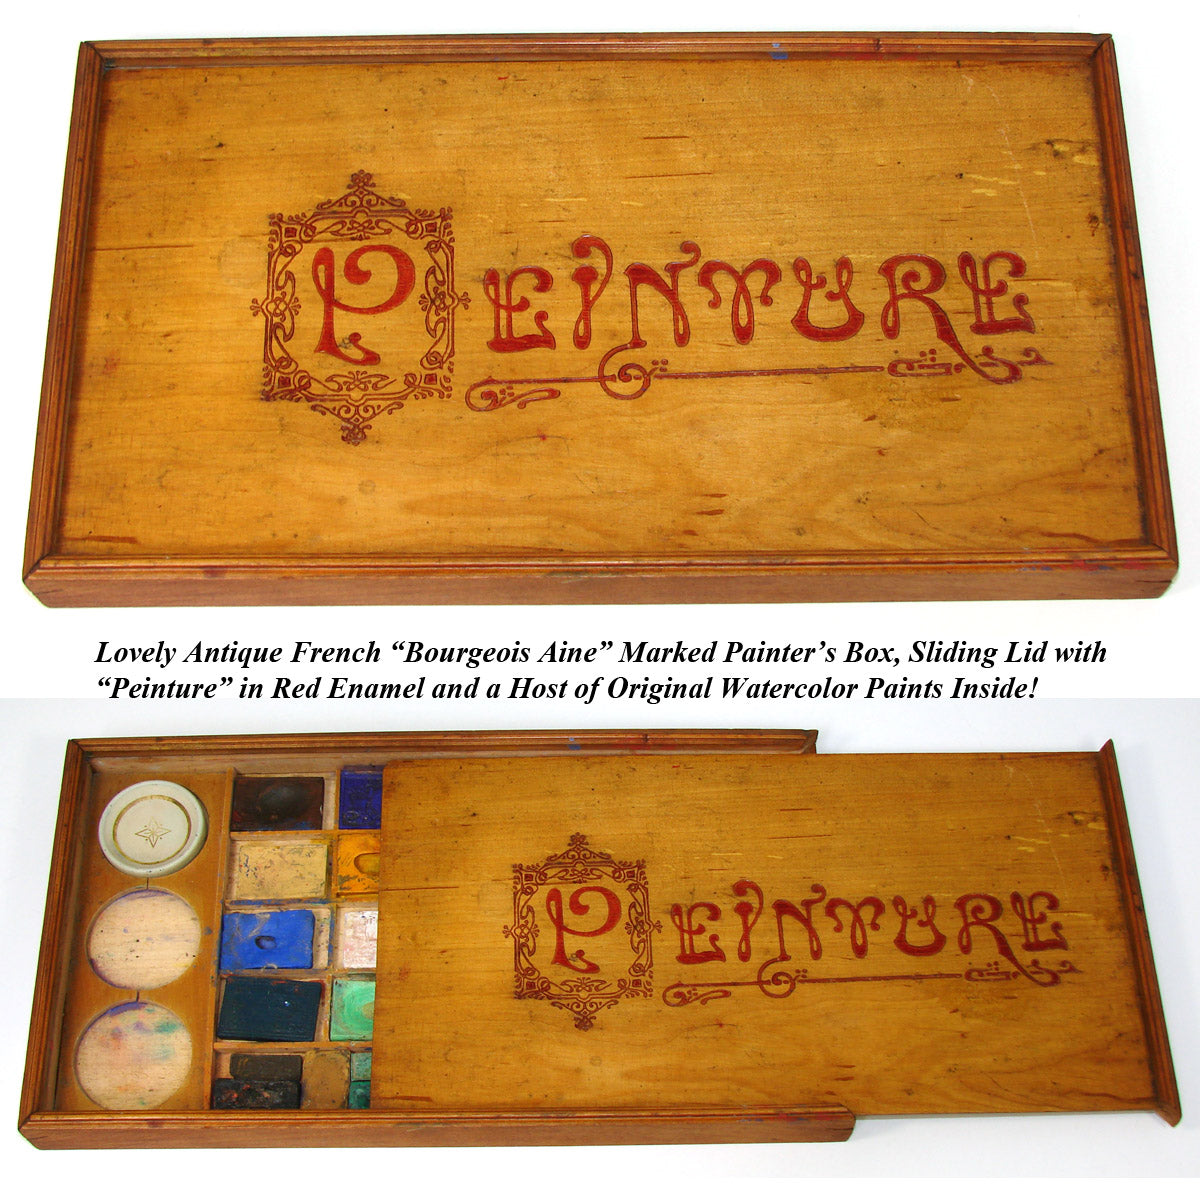 Antique French Painter's Box, Bourgeois Aine Water Color Cakes, "Peinture"